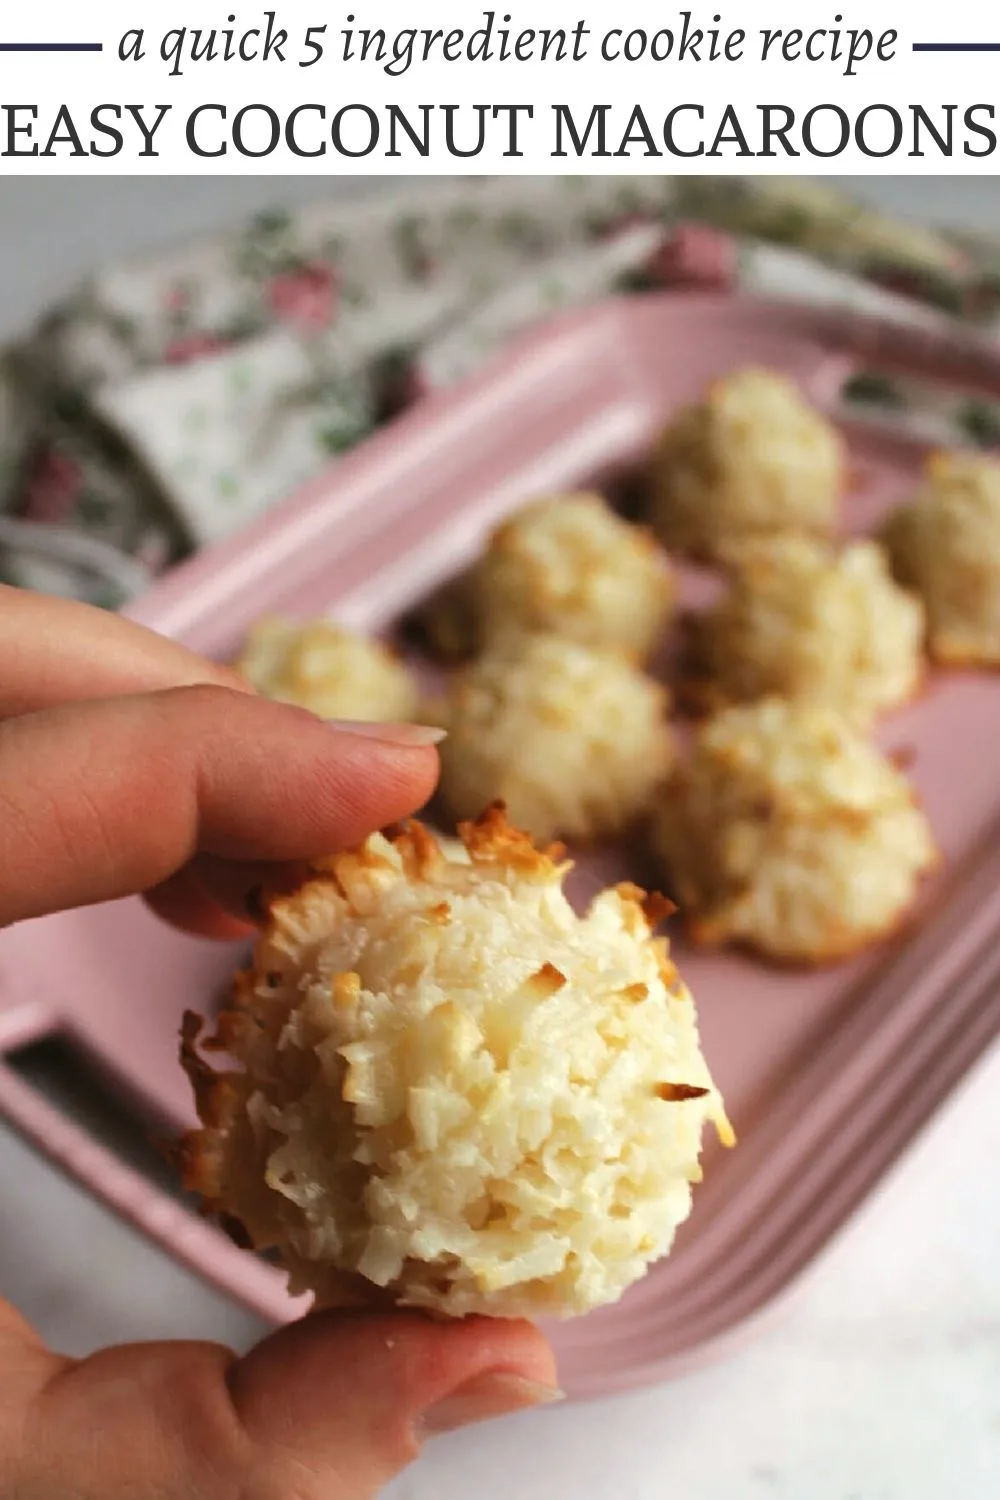 Chewy coconut macaroons are such a simple cookie to make. The dough comes together in just a couple of minutes and the goodness of sweetened condensed milk is baked right in!